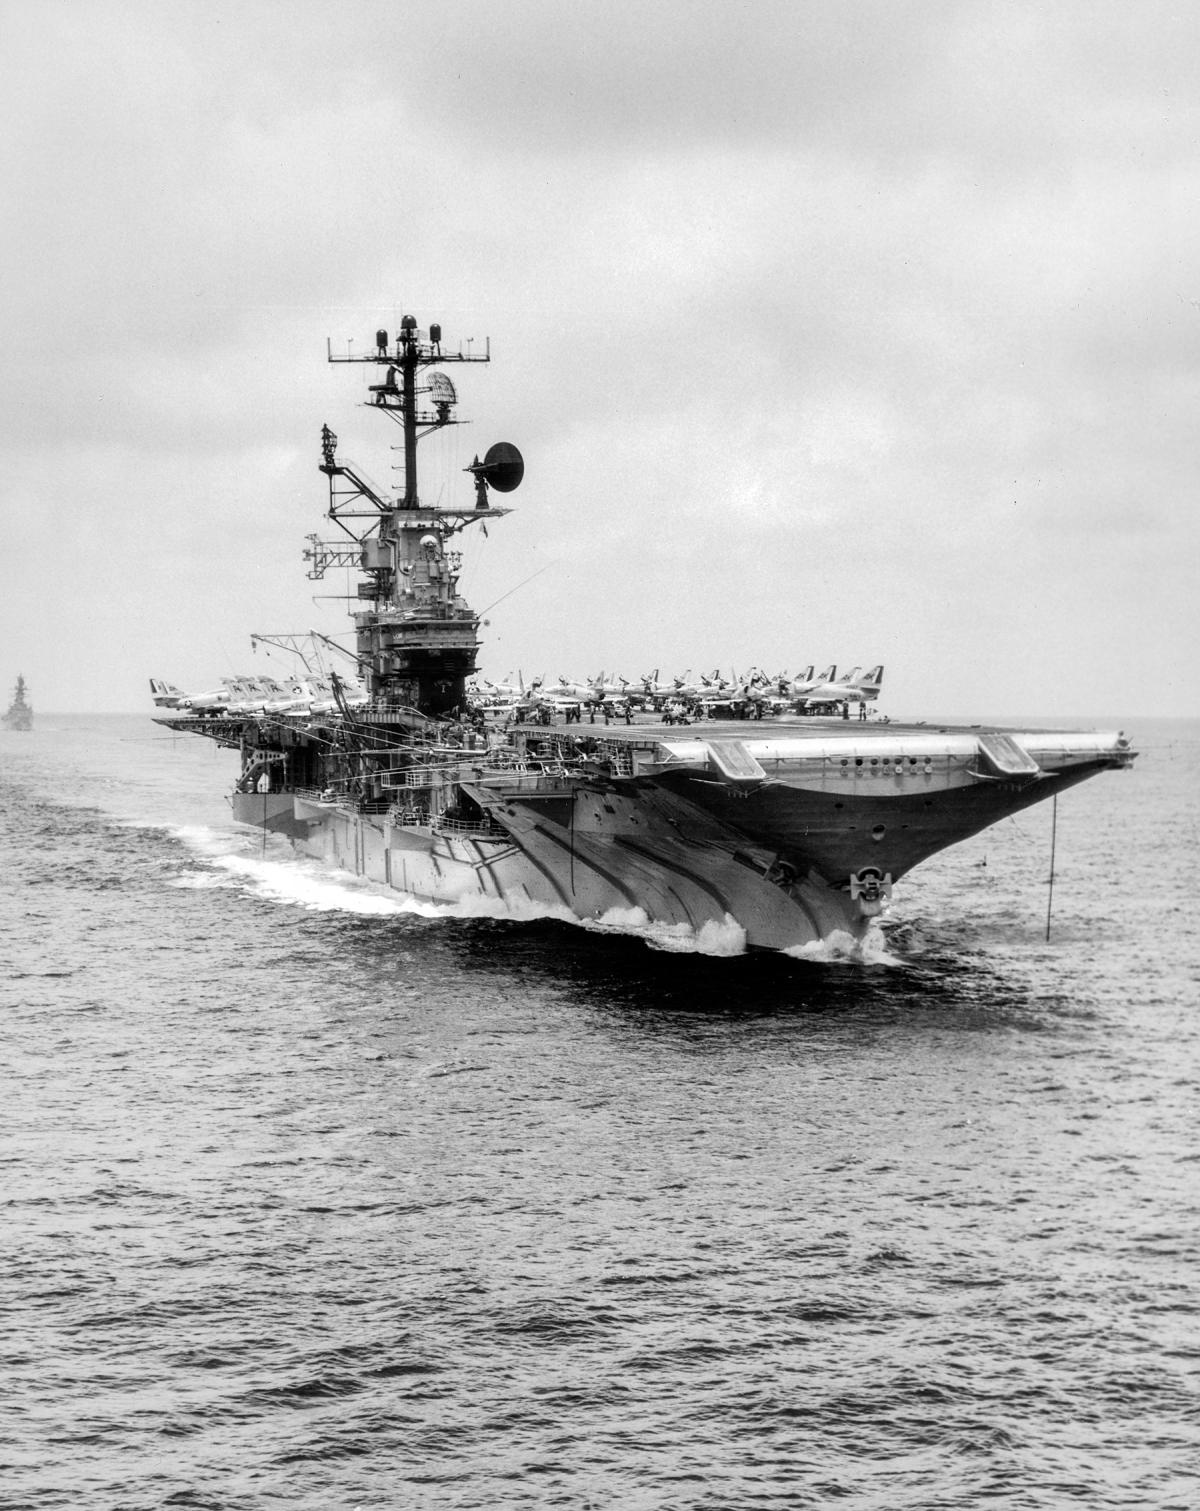 Starboard bow view of the USS Intrepid (CVS-11) underway